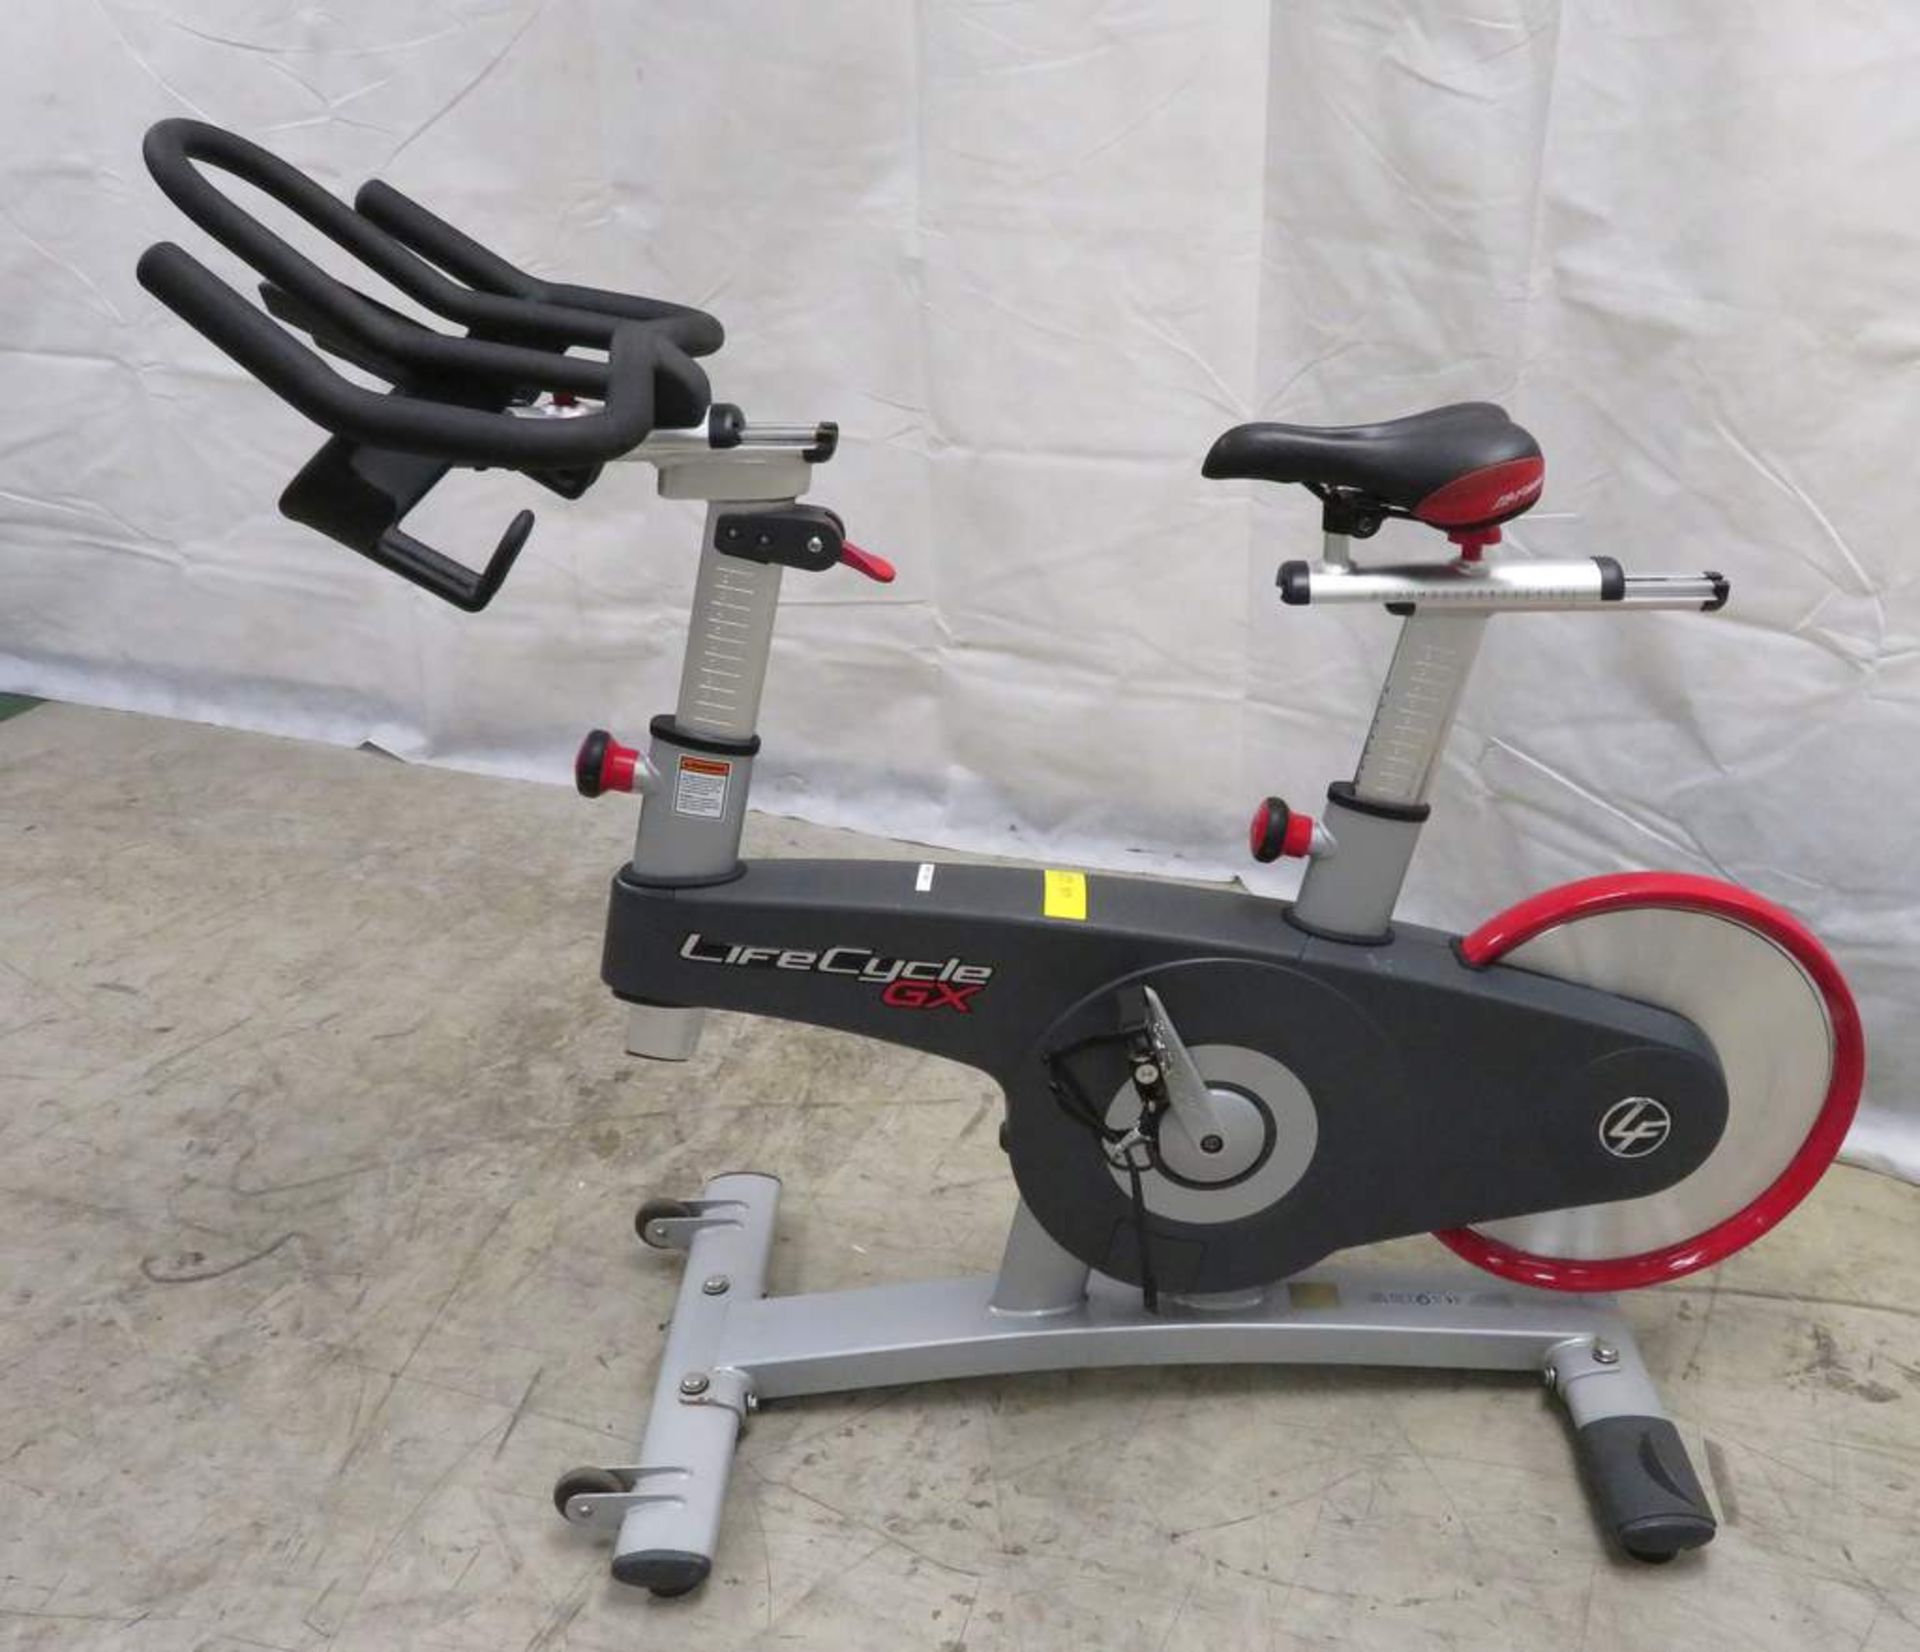 Life Fitness - Life Cycle GX spin bike - Image 2 of 10